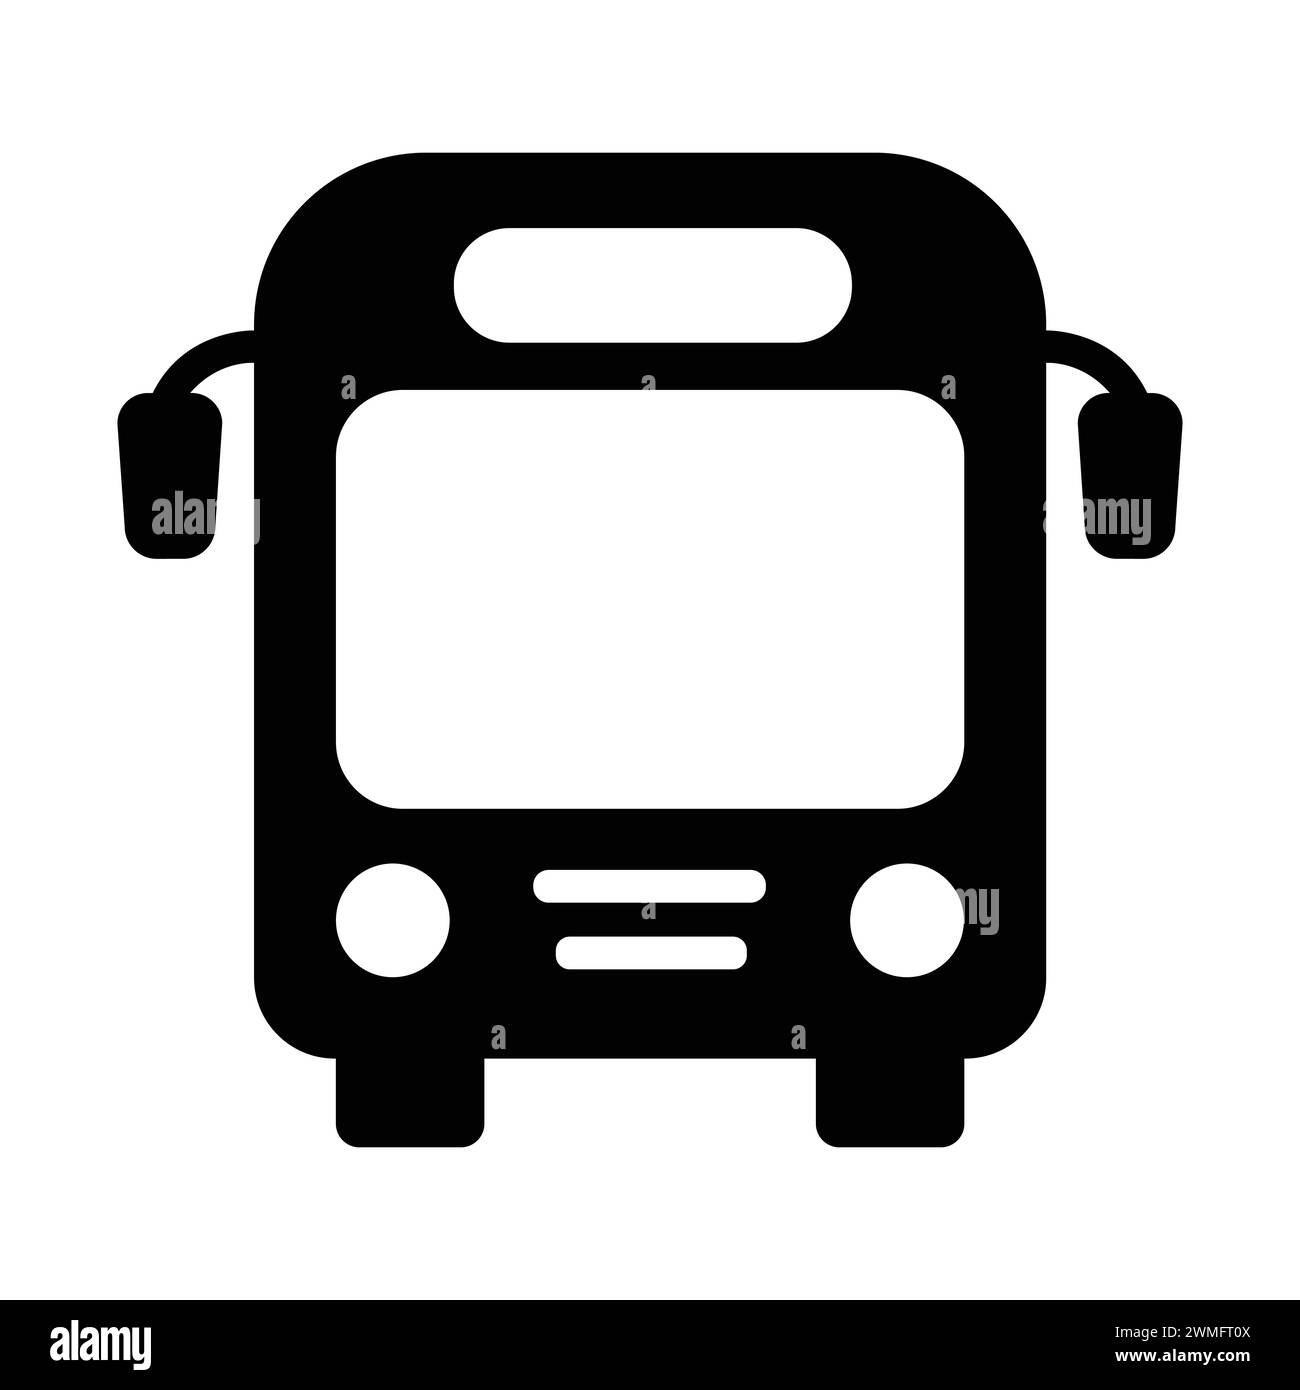 Bus Icon Outline. Bus Front View Flat Icon For Apps And Websites. Frontal Vehicle Symbol On Transparent Background. Public Transport Illustration Stock Vector